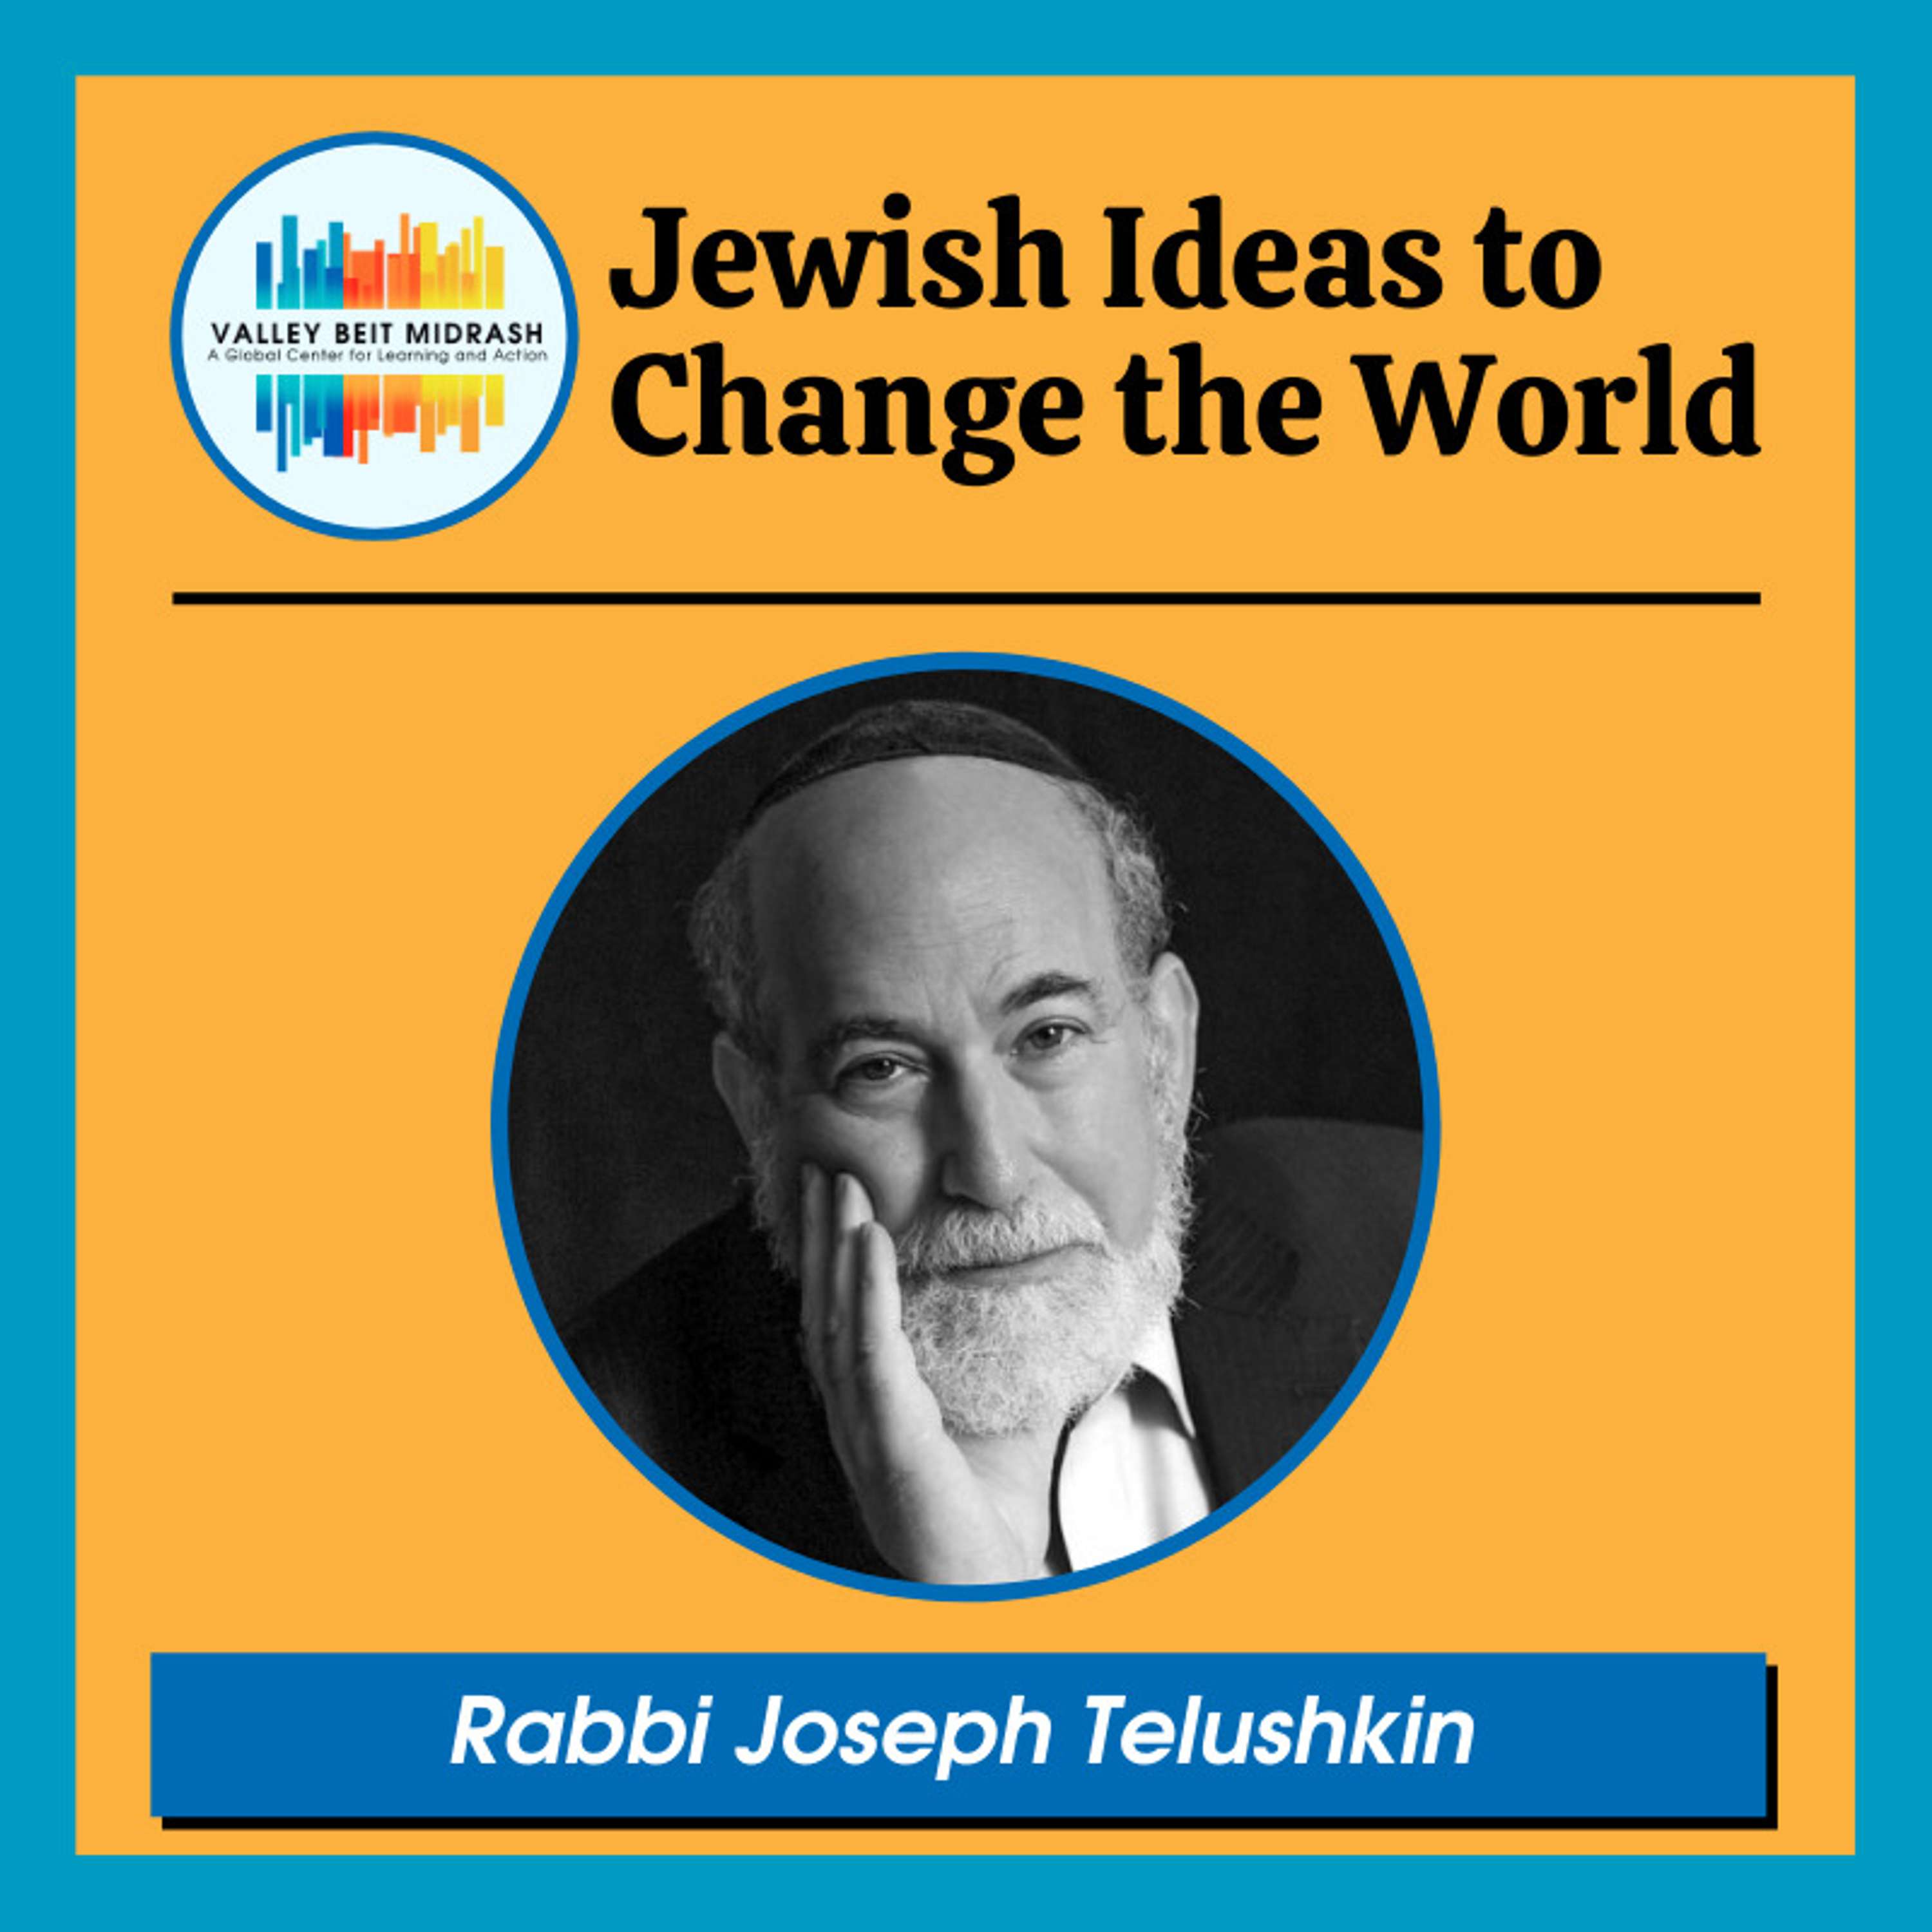 Rabbi Joseph Telushkin – Moral Imagination: On Being A Good Person In A Morally Complicated World